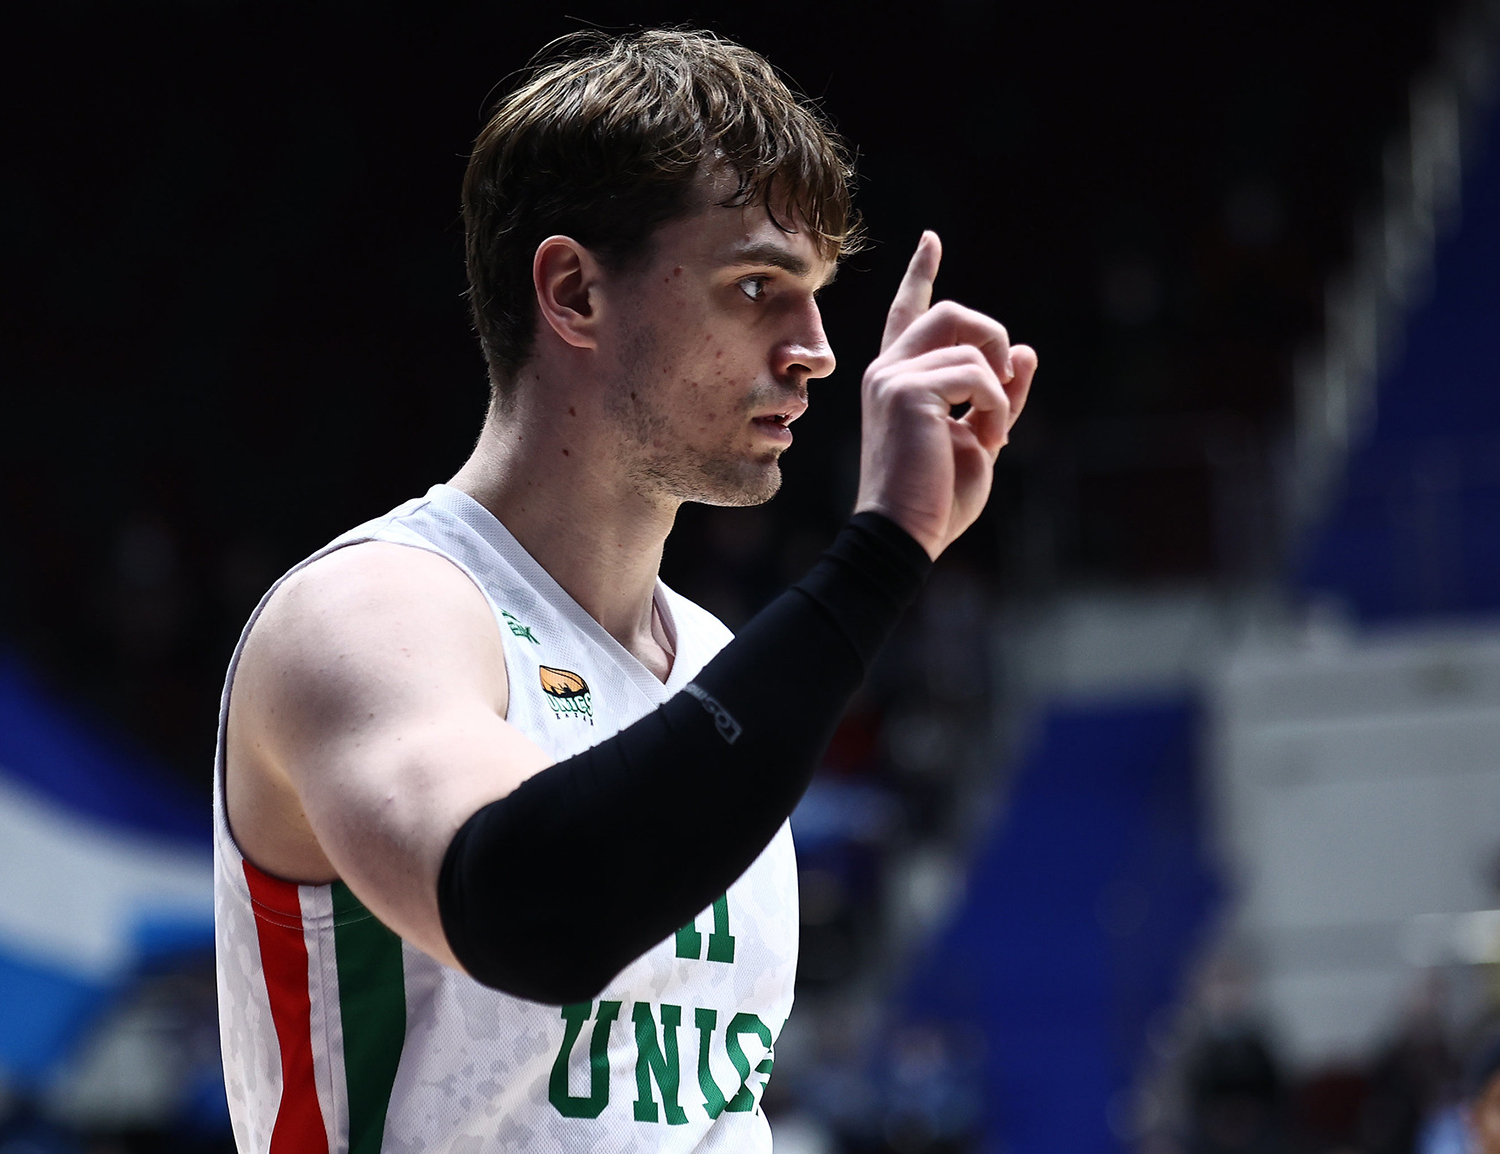 Mario Hezonja is the MVP of December according to the fans!